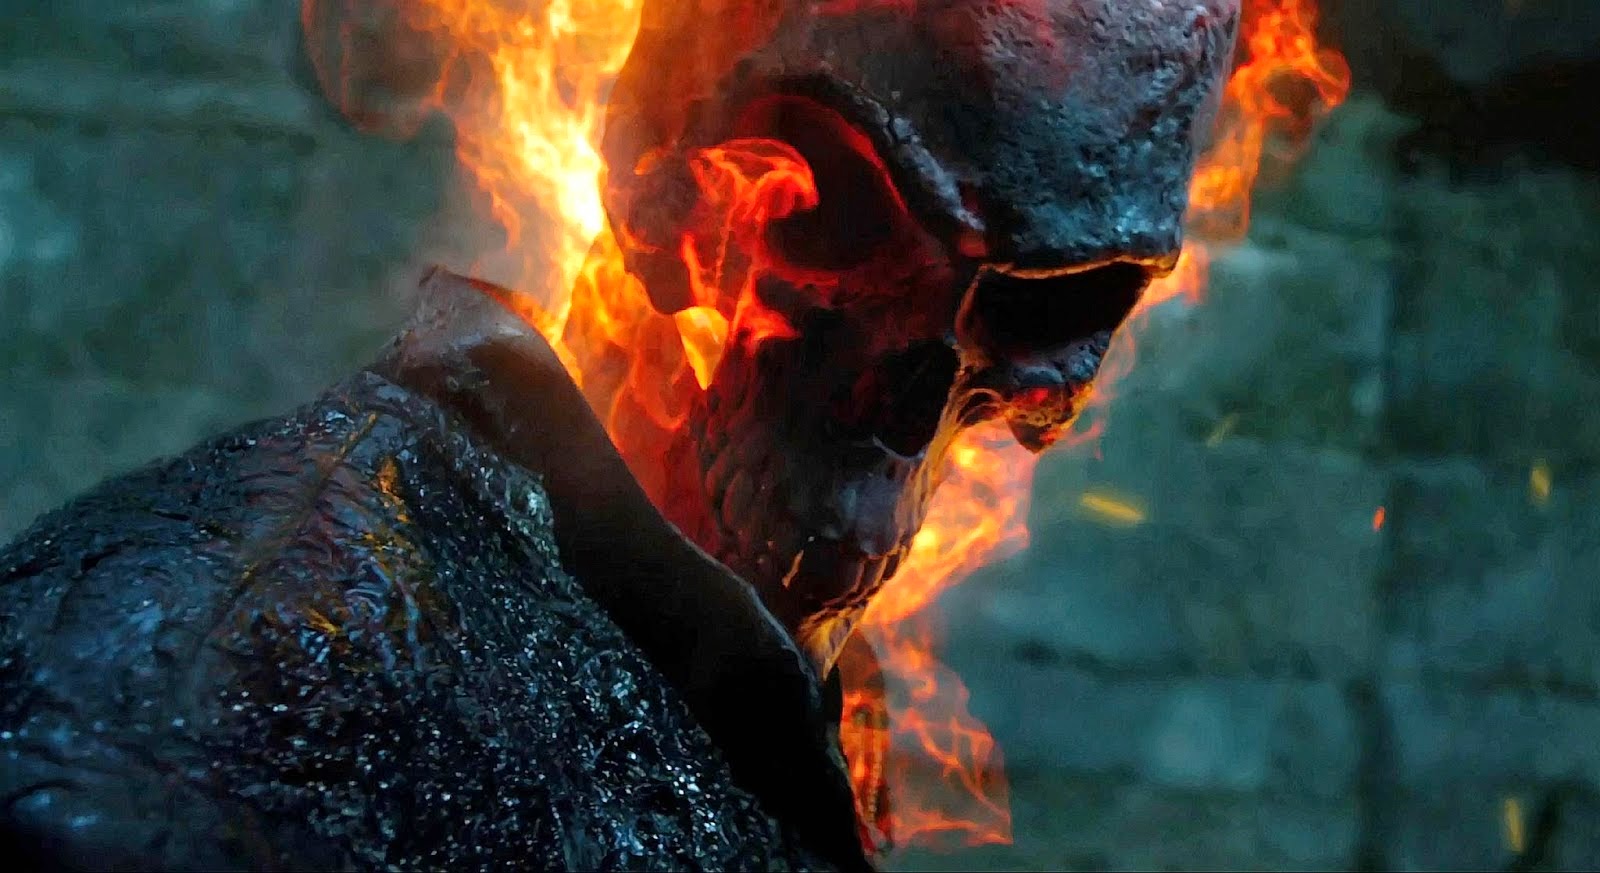 Ghost Rider HD Wallpapers Free Download HD WALLPAPERS